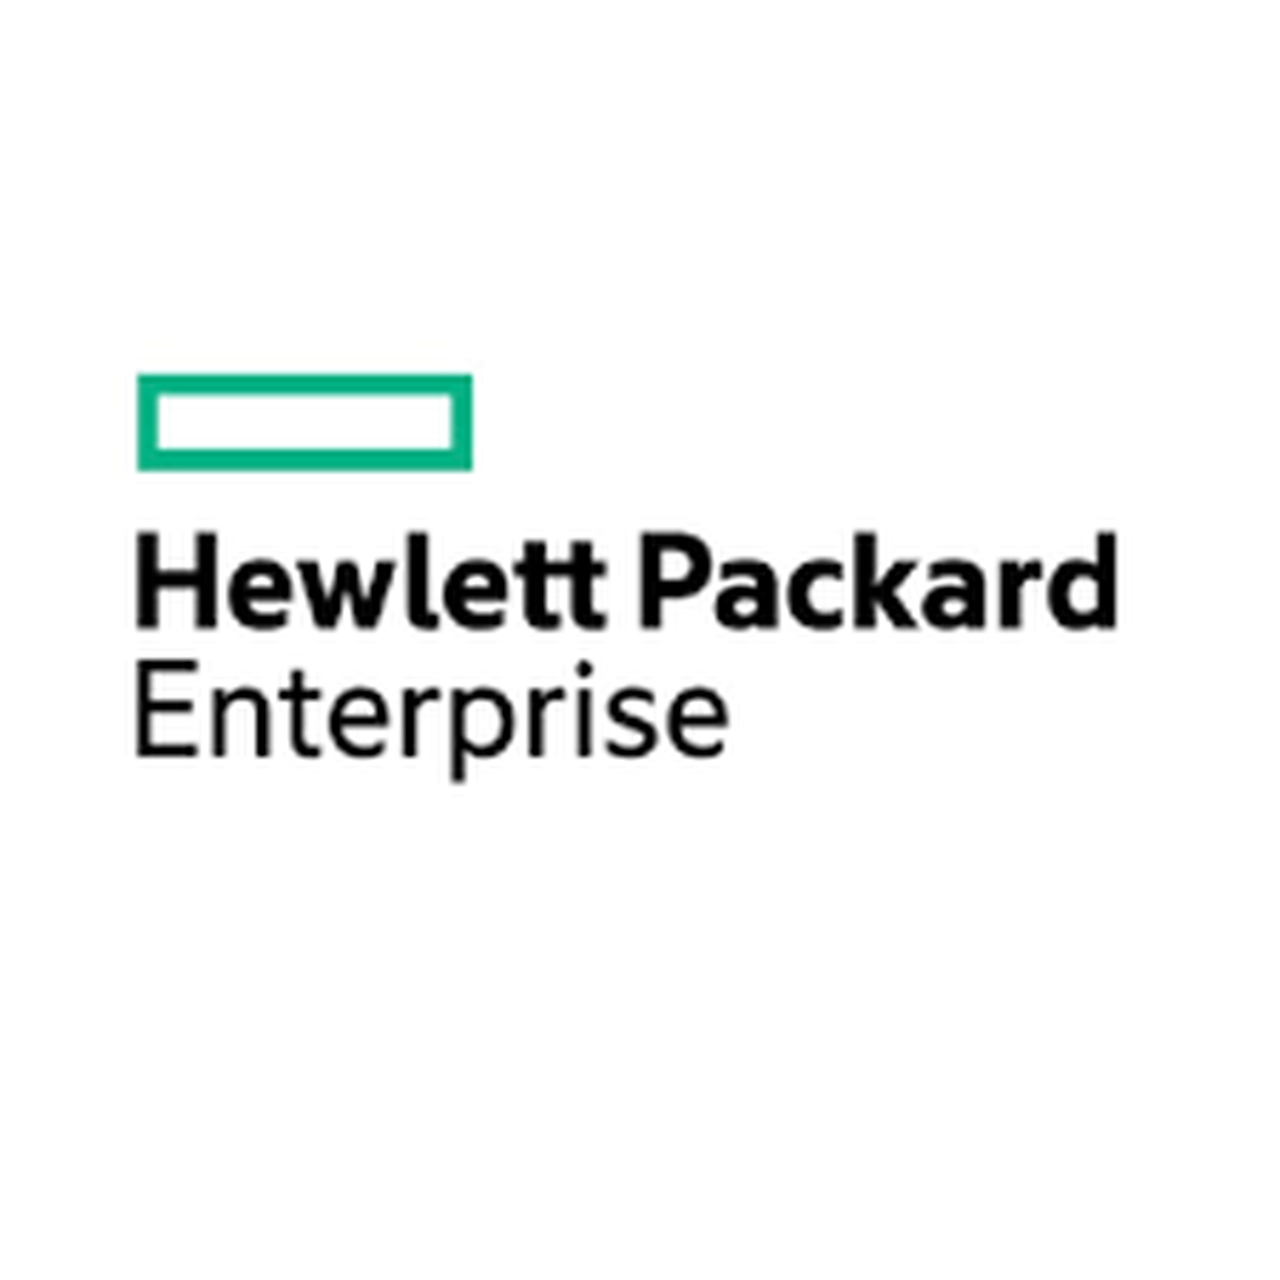 HPE 5940 48p 10G/6p 100G 2 Reman F PS Europe - English localization